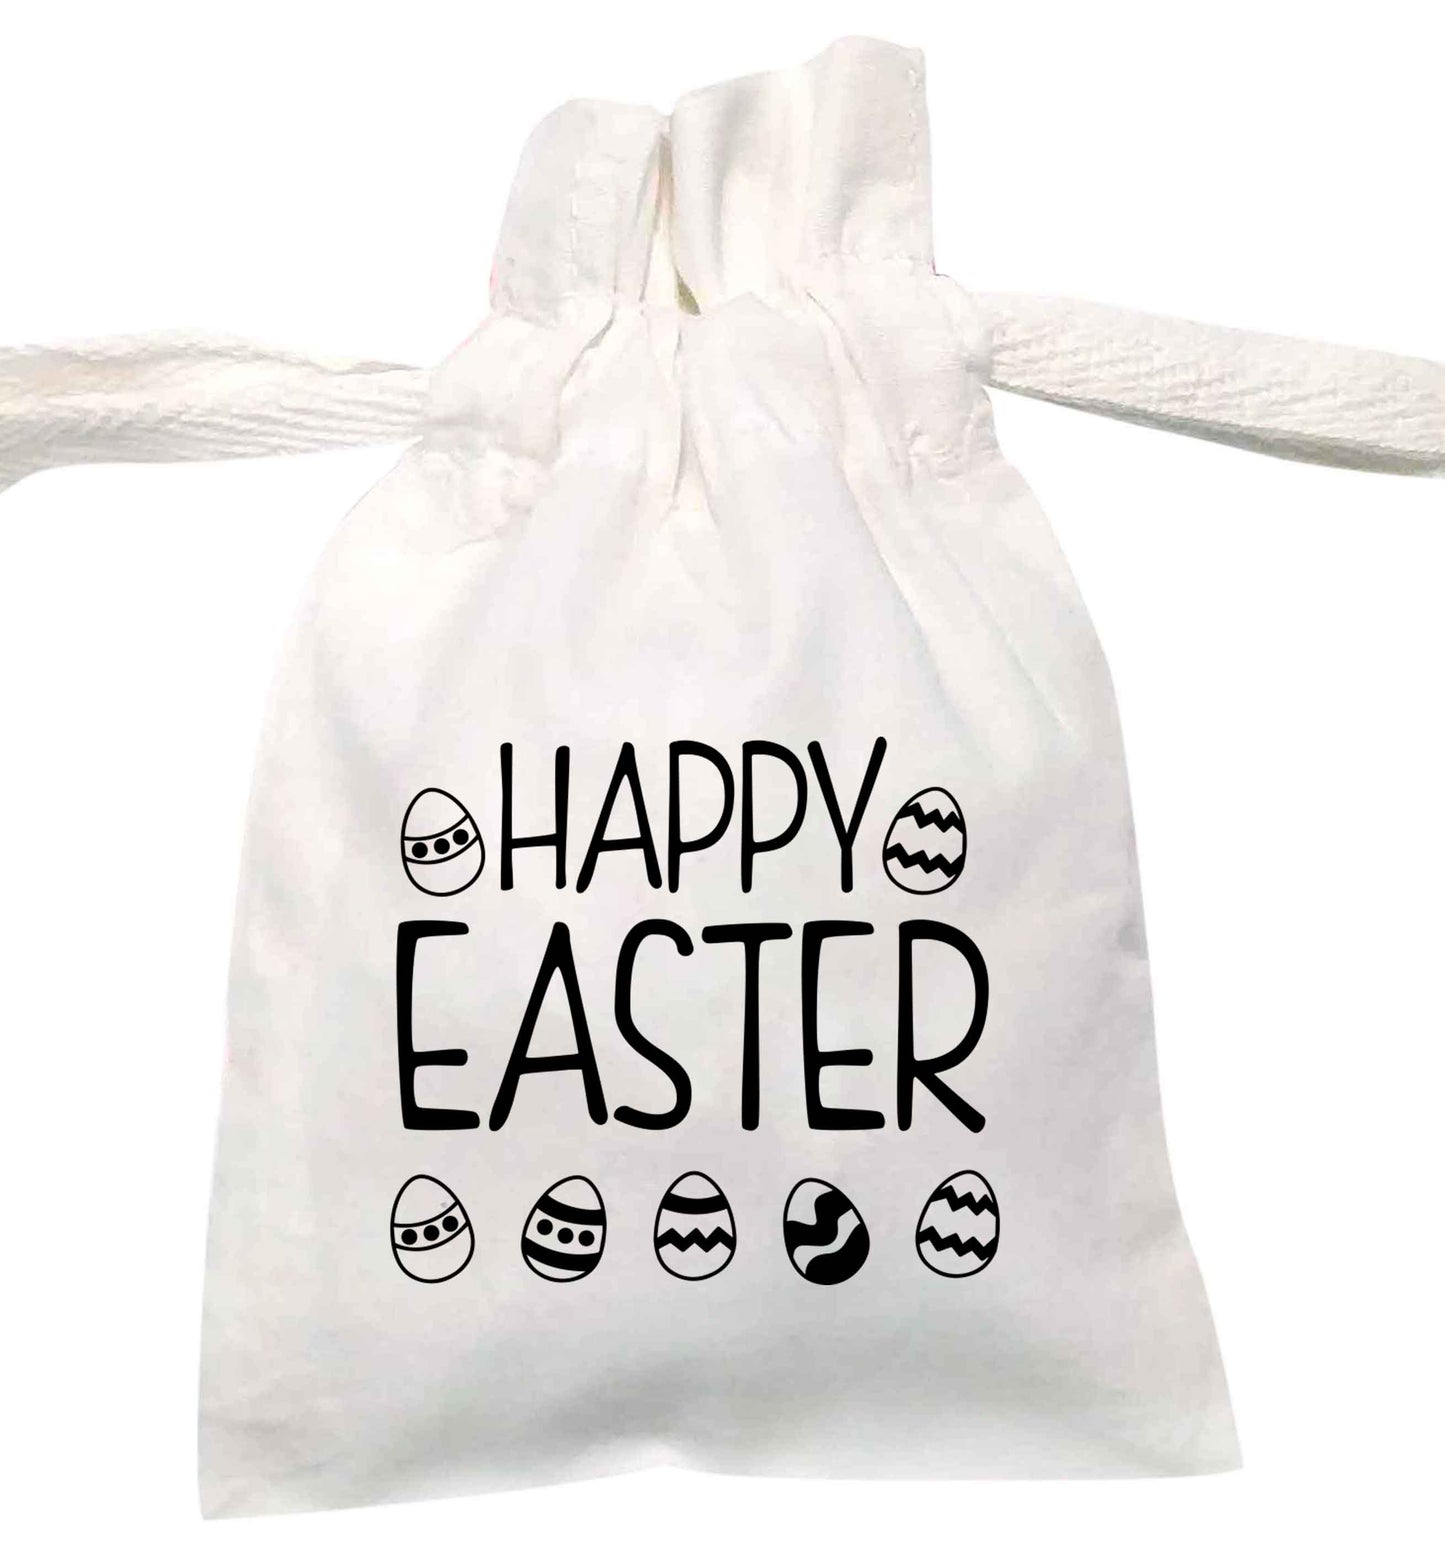 Happy Easter | XS - L | Pouch / Drawstring bag / Sack | Organic Cotton | Bulk discounts available!